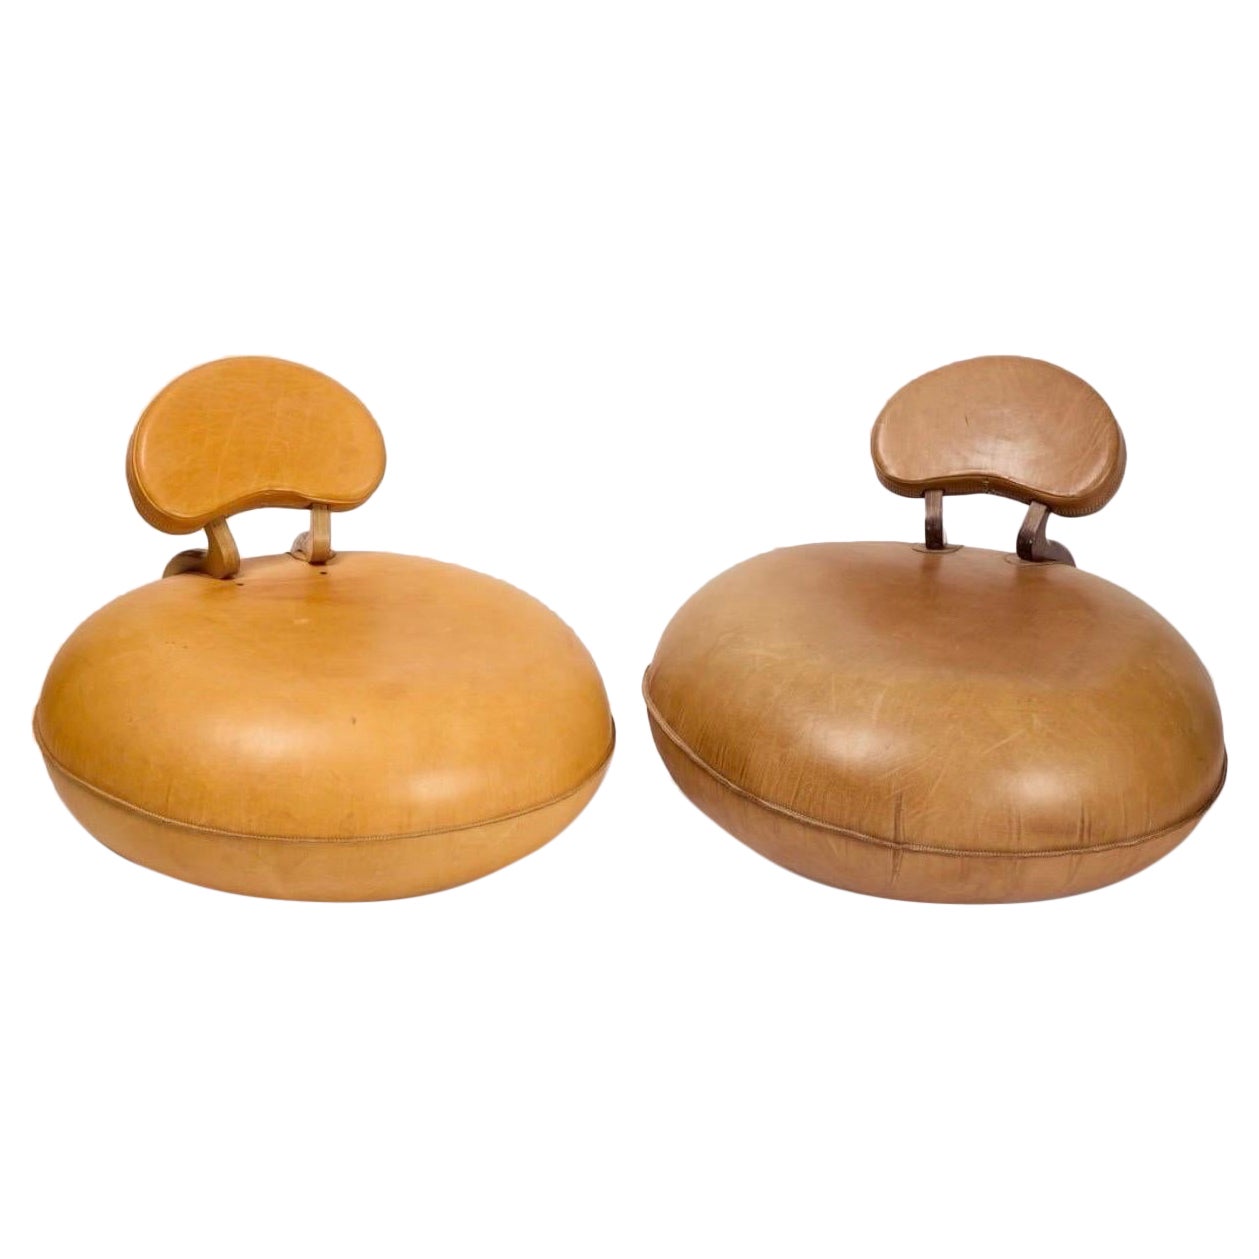 Pair of 1970's Leather Inflatable Chairs "Bake Bean" For Sale